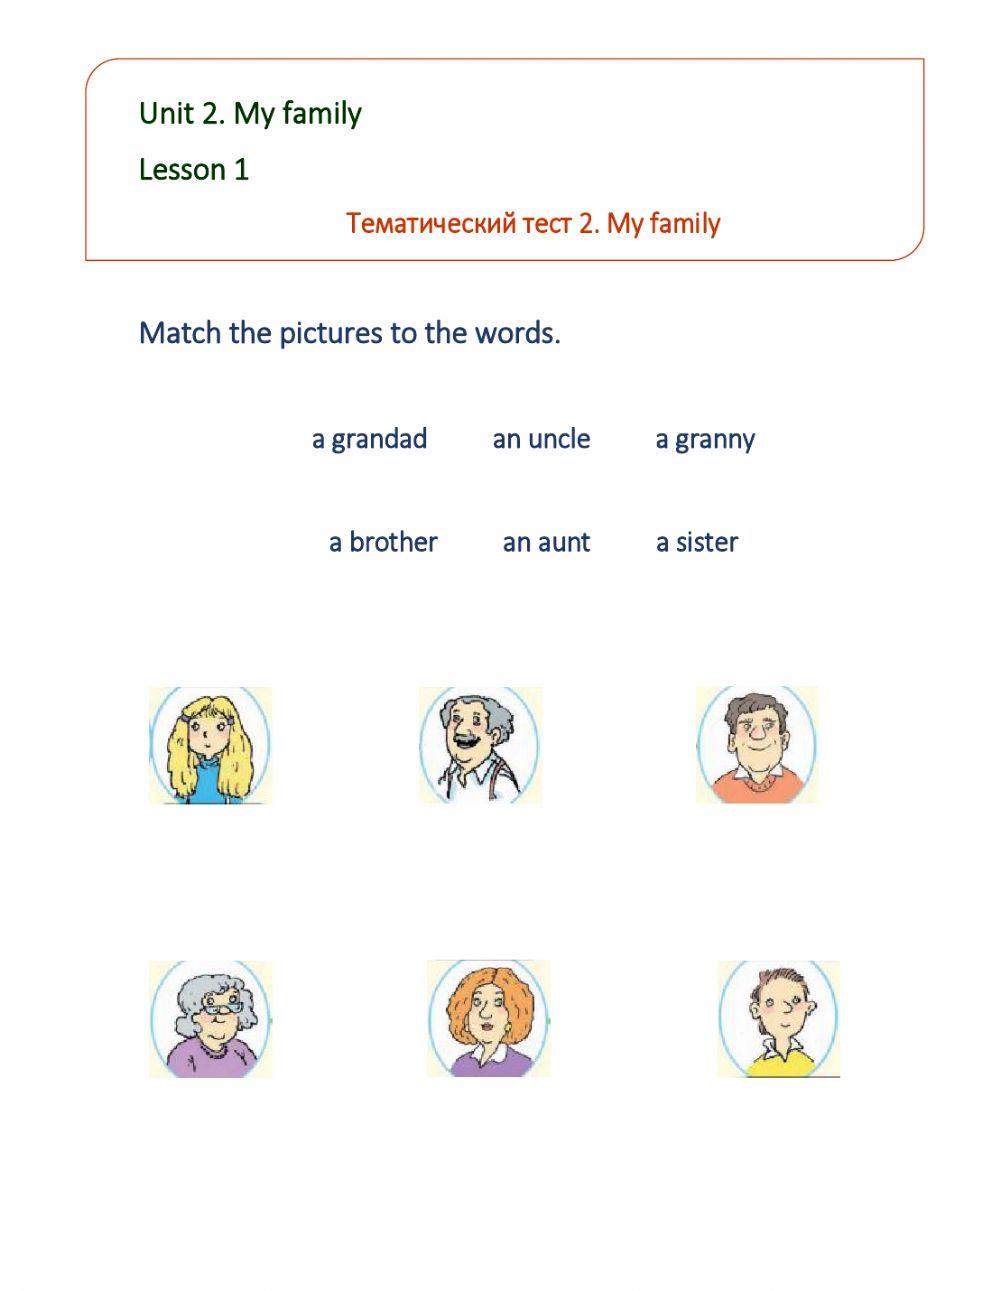 English-4-Unit 2-Lesson 1 Тематический тест 2 «My family». Match the pictures to the words